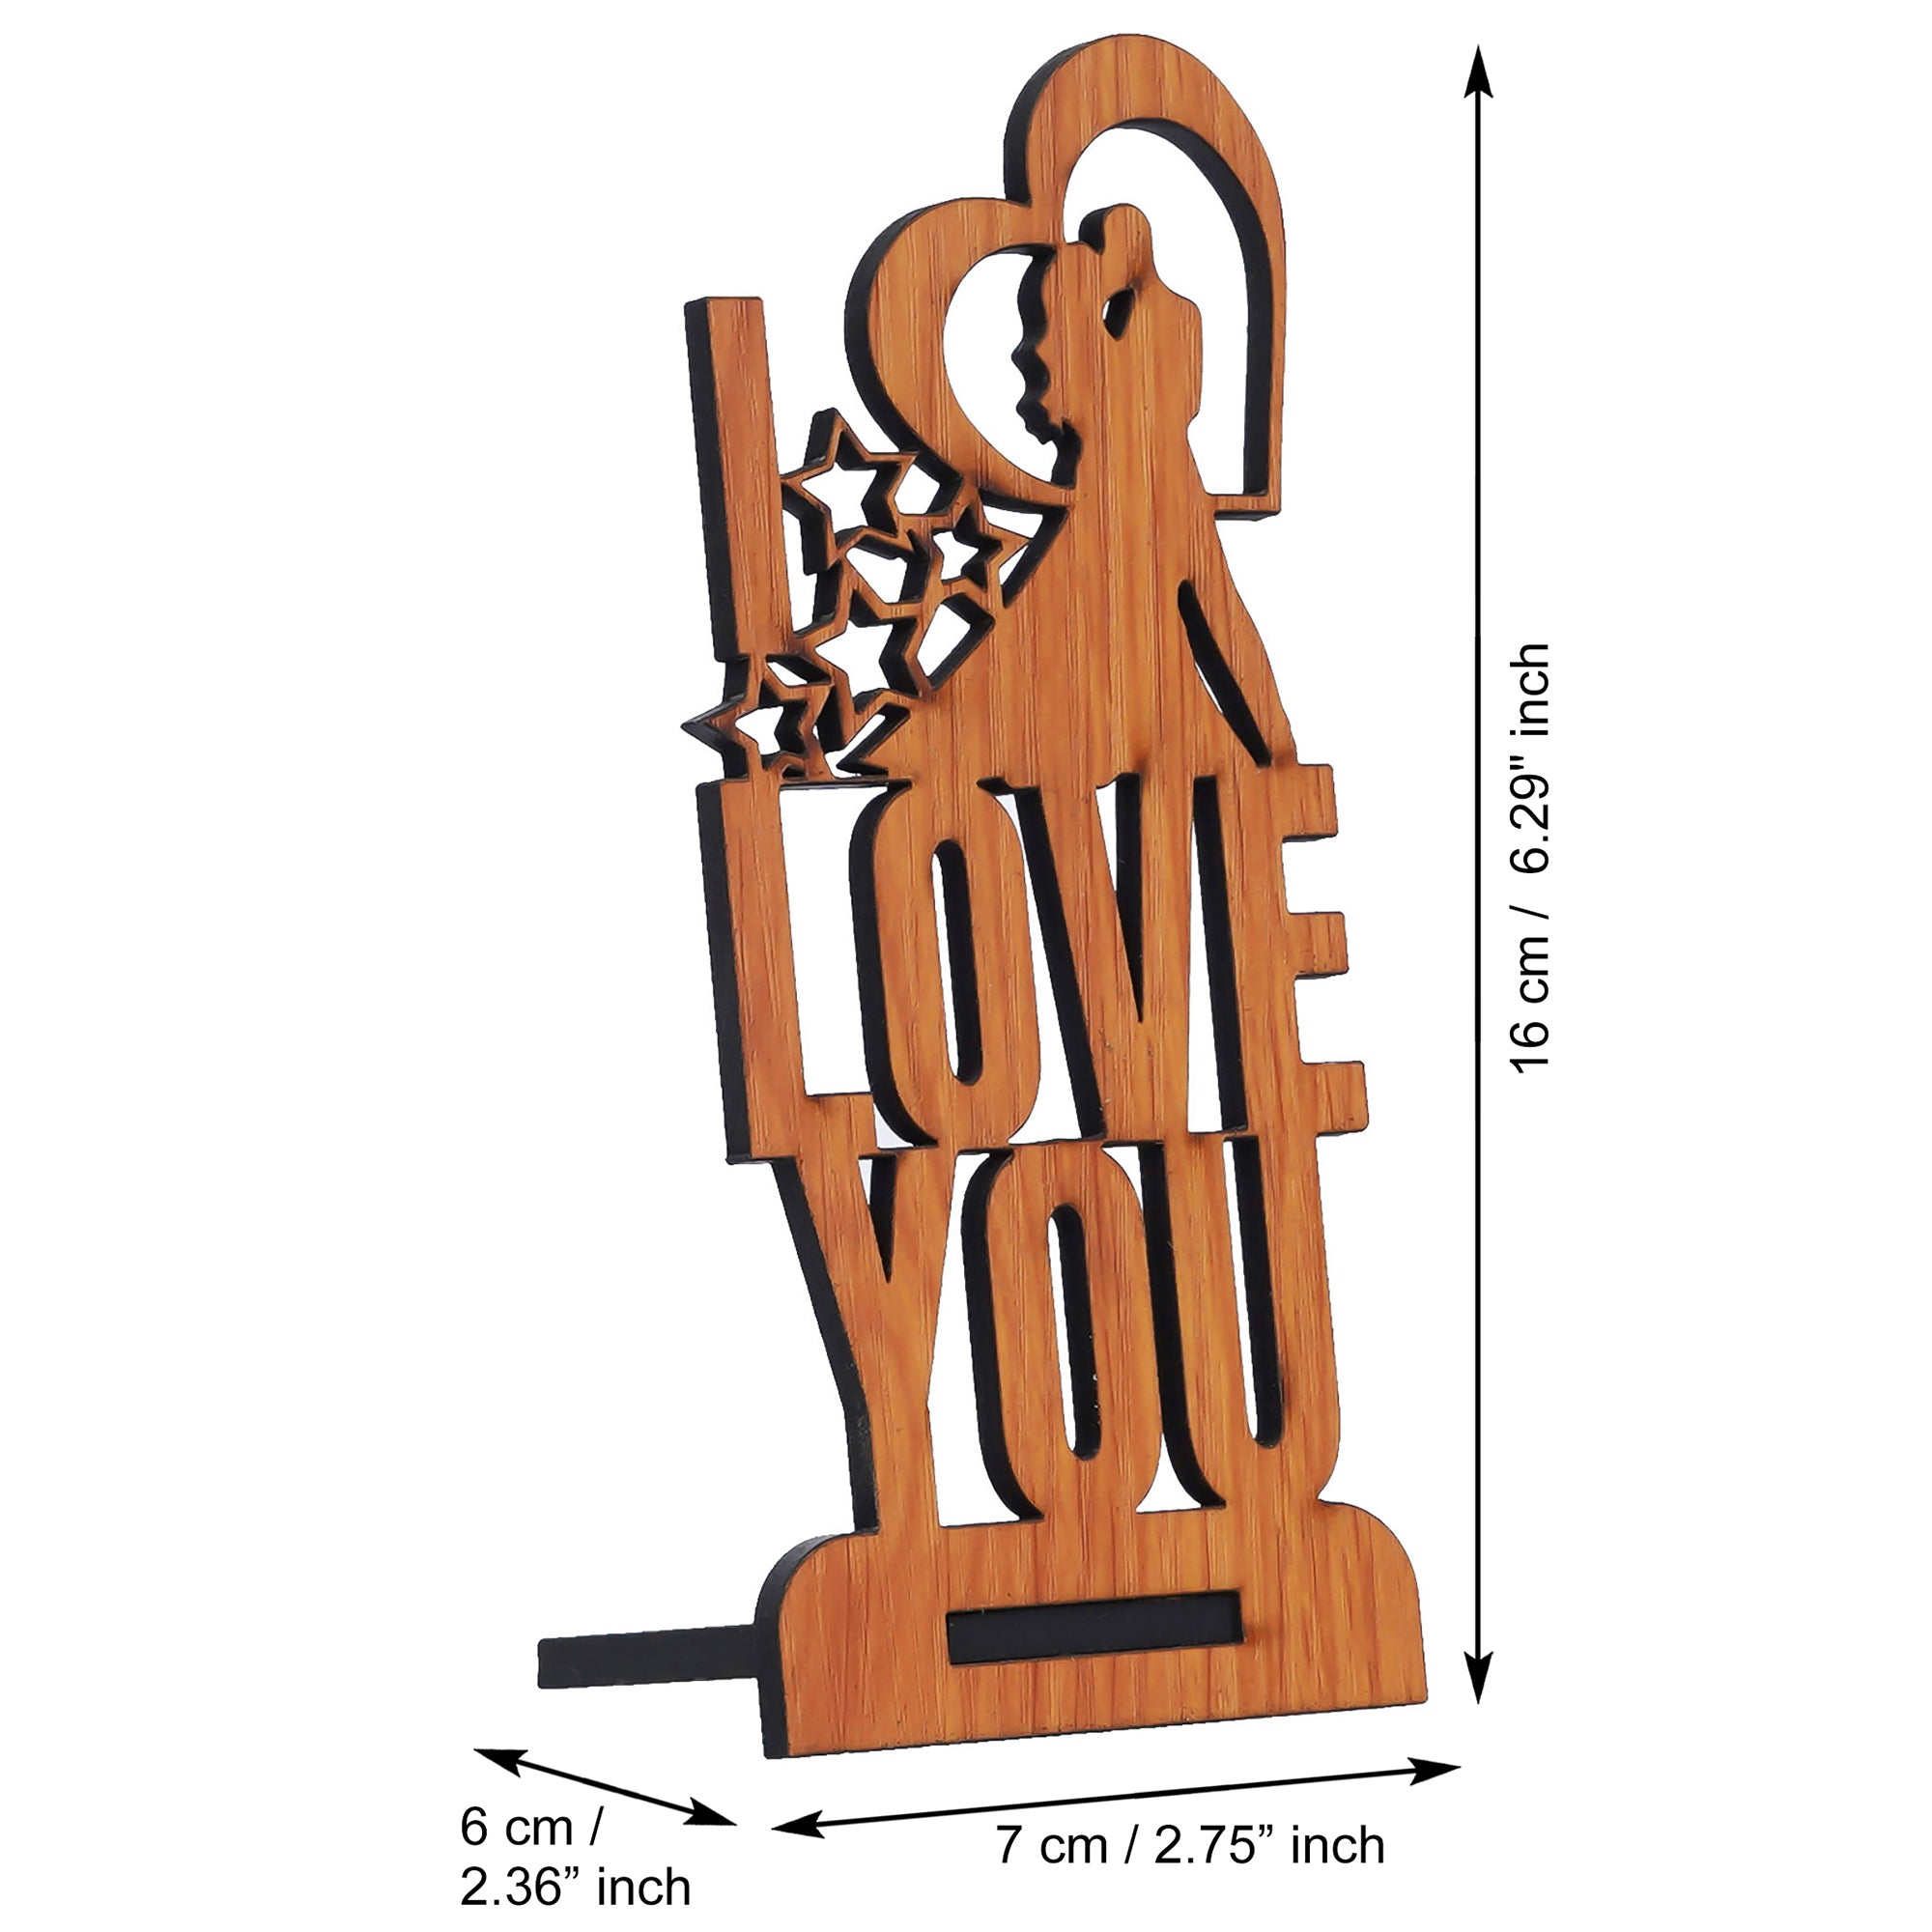 Valentine Combo of "Love You" Wooden Showpiece With Stand, Pink Heart Shaped Gift Box with Teddy and Roses 2